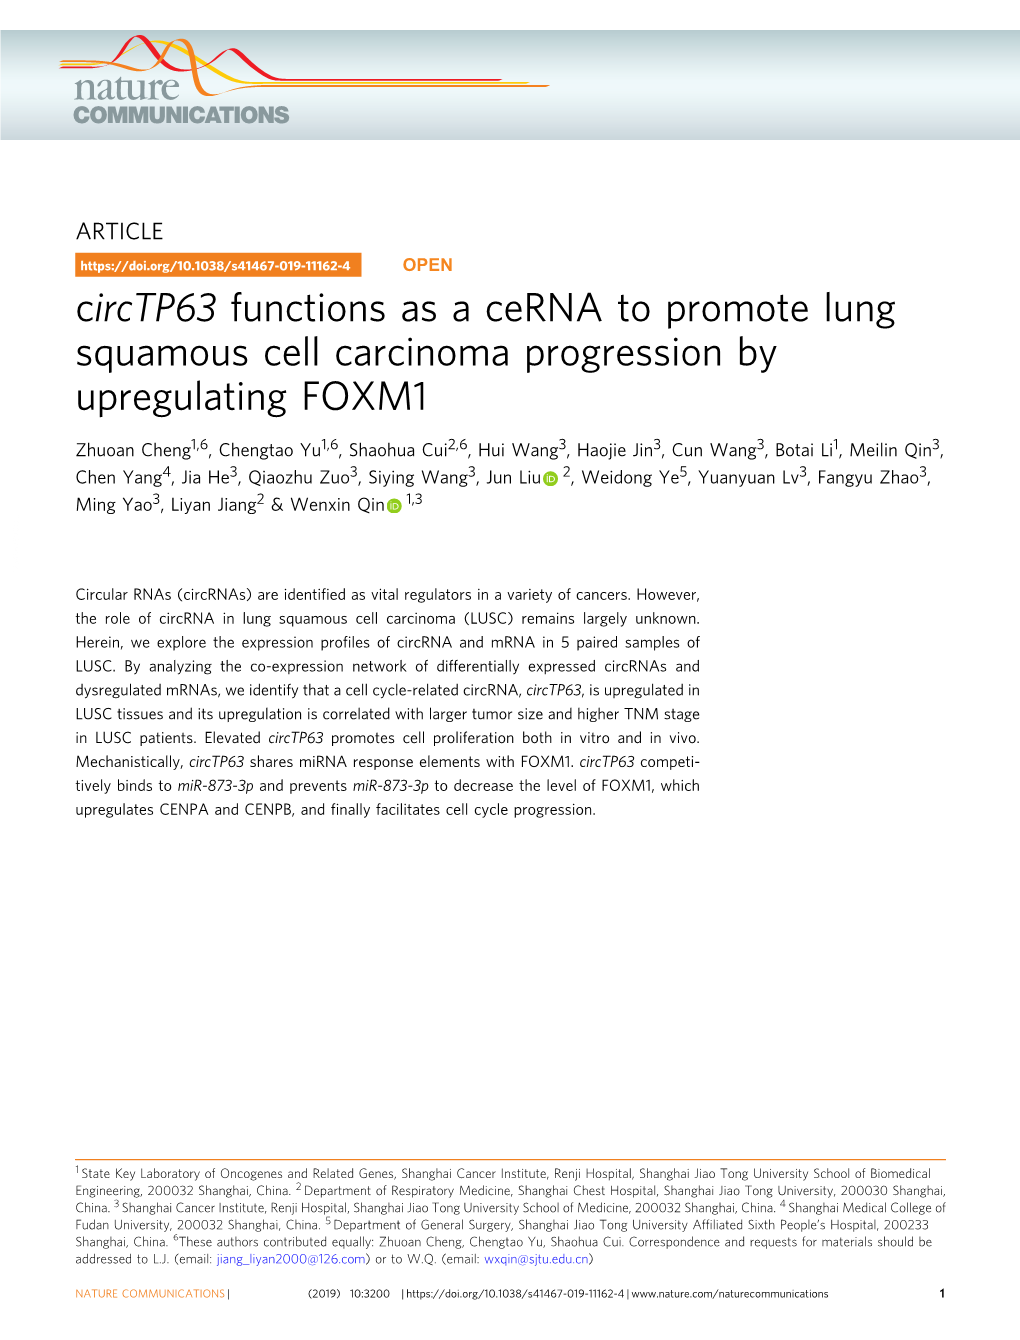 Circtp63 Functions As a Cerna to Promote Lung Squamous Cell Carcinoma Progression by Upregulating FOXM1